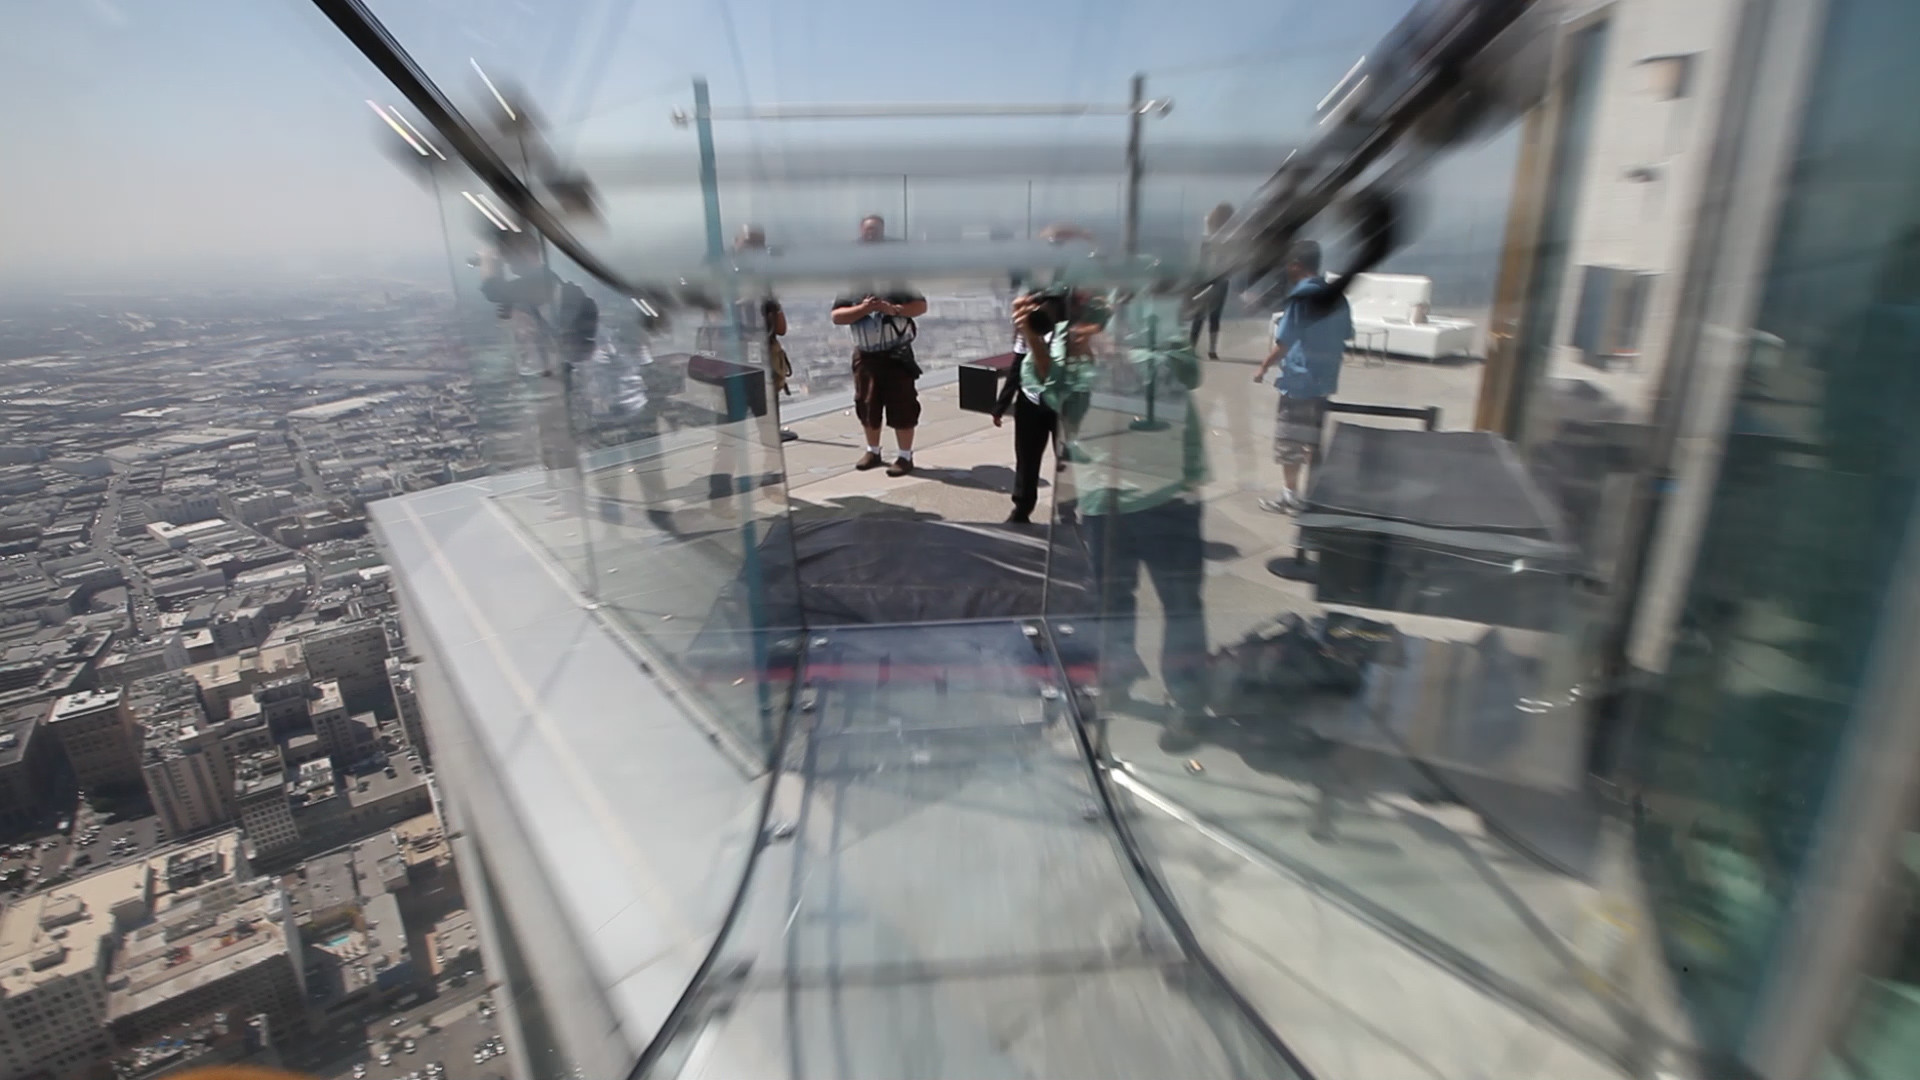 Ride the glass Skyslide at the US Bank Tower - LA Times